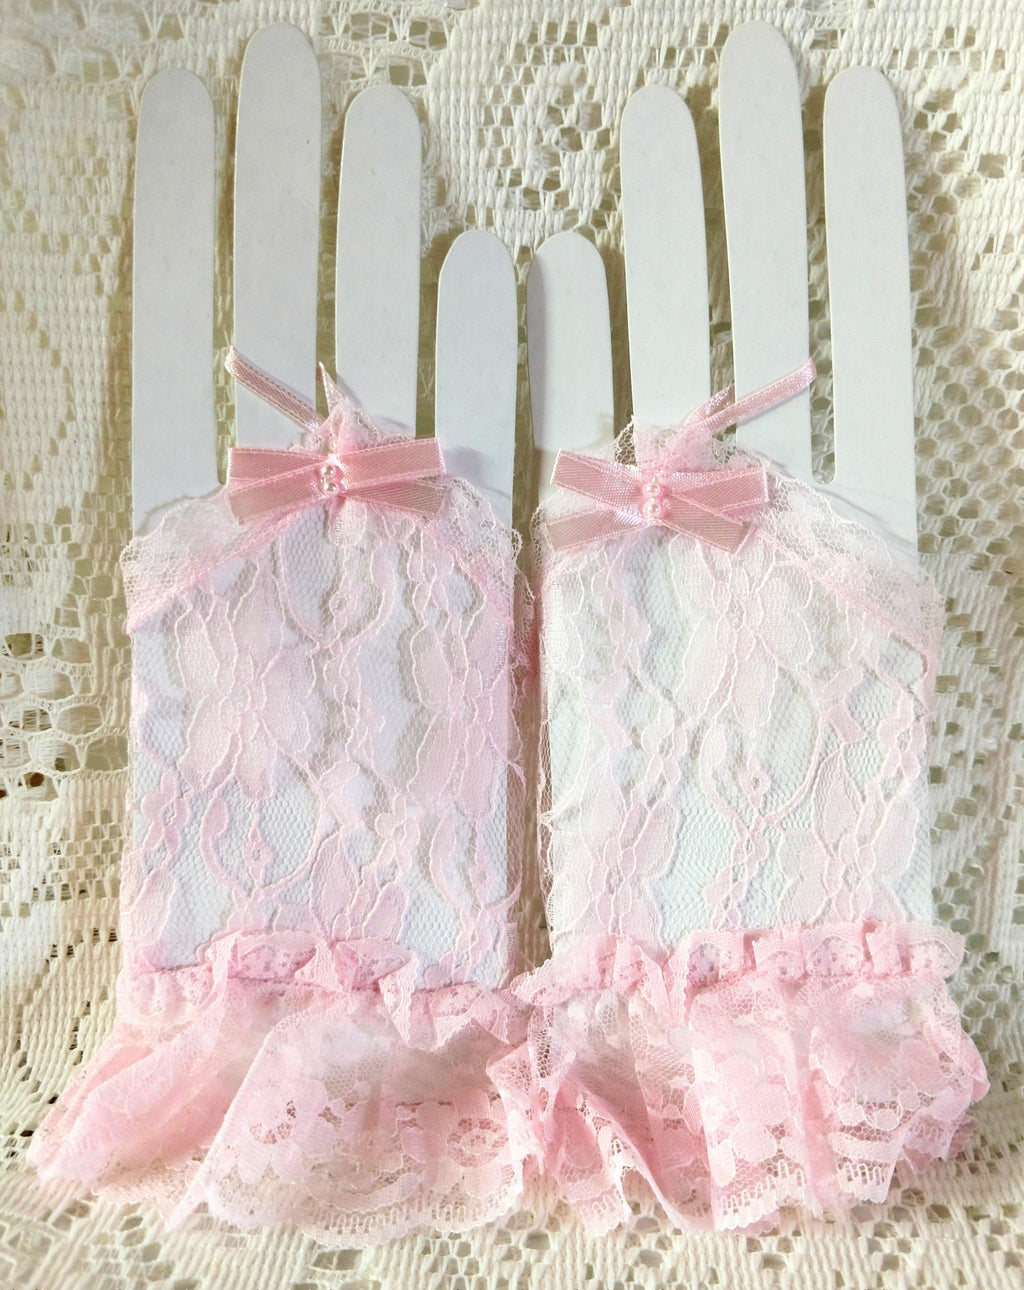 Pink Fingerless Lace Gloves Perfect for Tea Parties or Bridal Affairs!!-Roses And Teacups